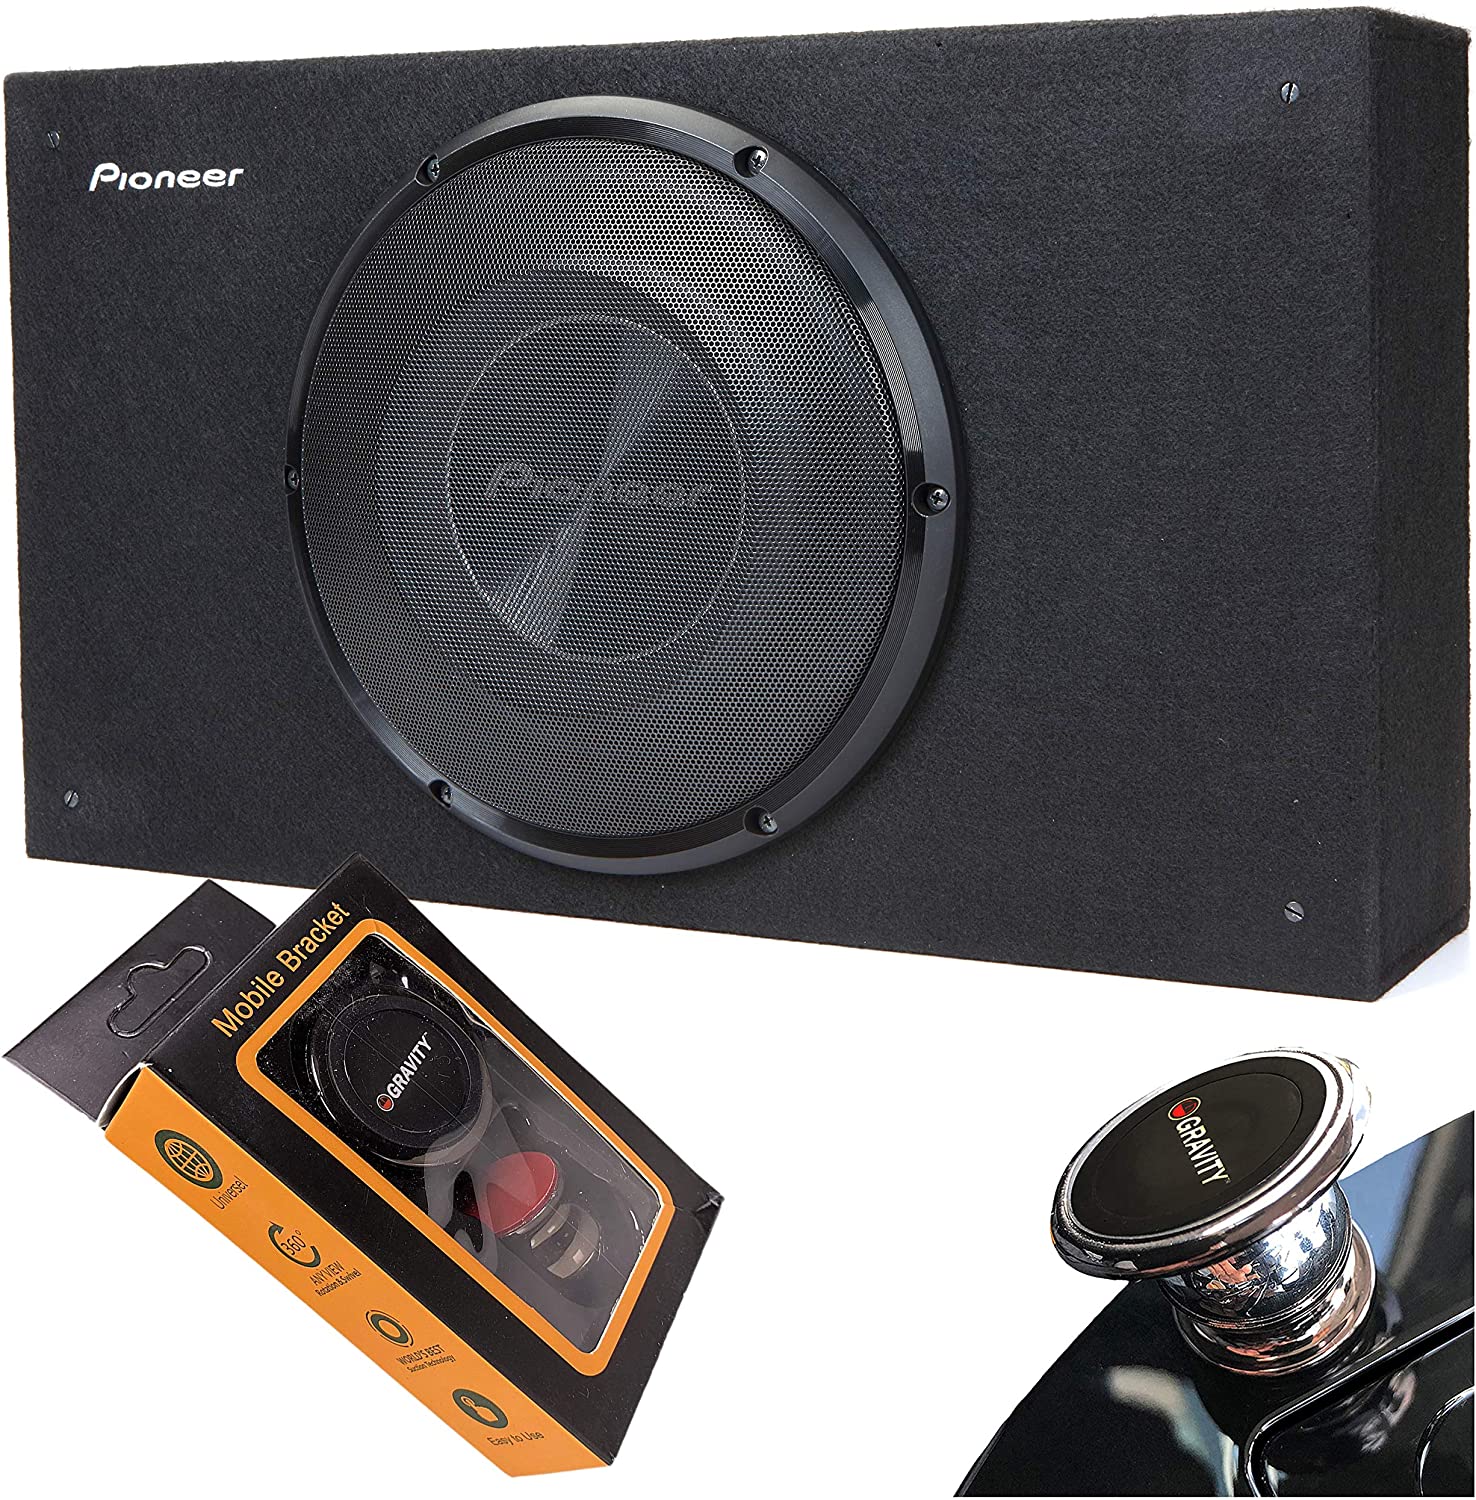 Best 8 inch subwoofer under $100 Pioneer TS-SWX2502 Subwoofer